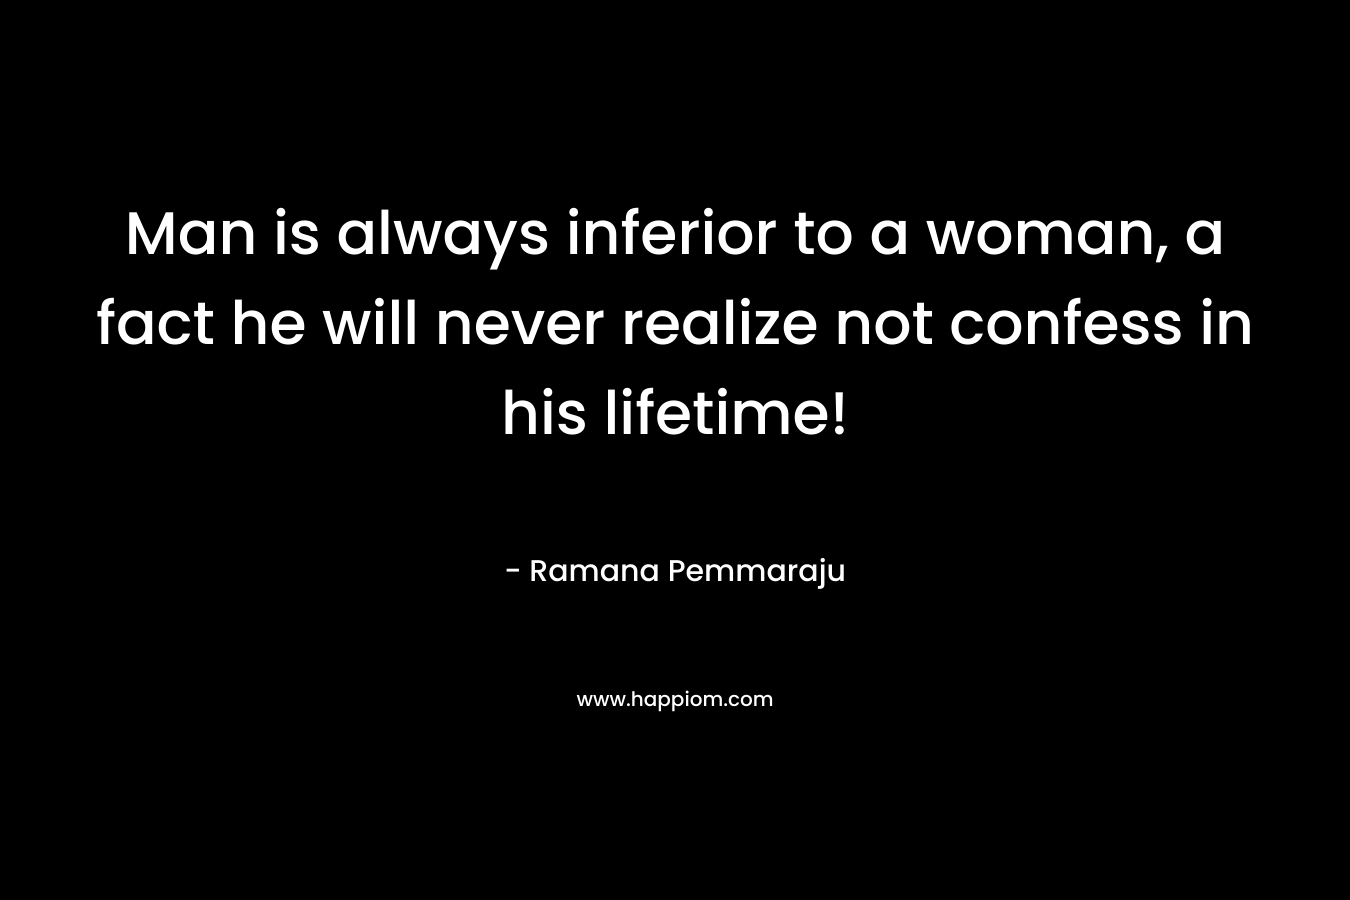 Man is always inferior to a woman, a fact he will never realize not confess in his lifetime! – Ramana Pemmaraju